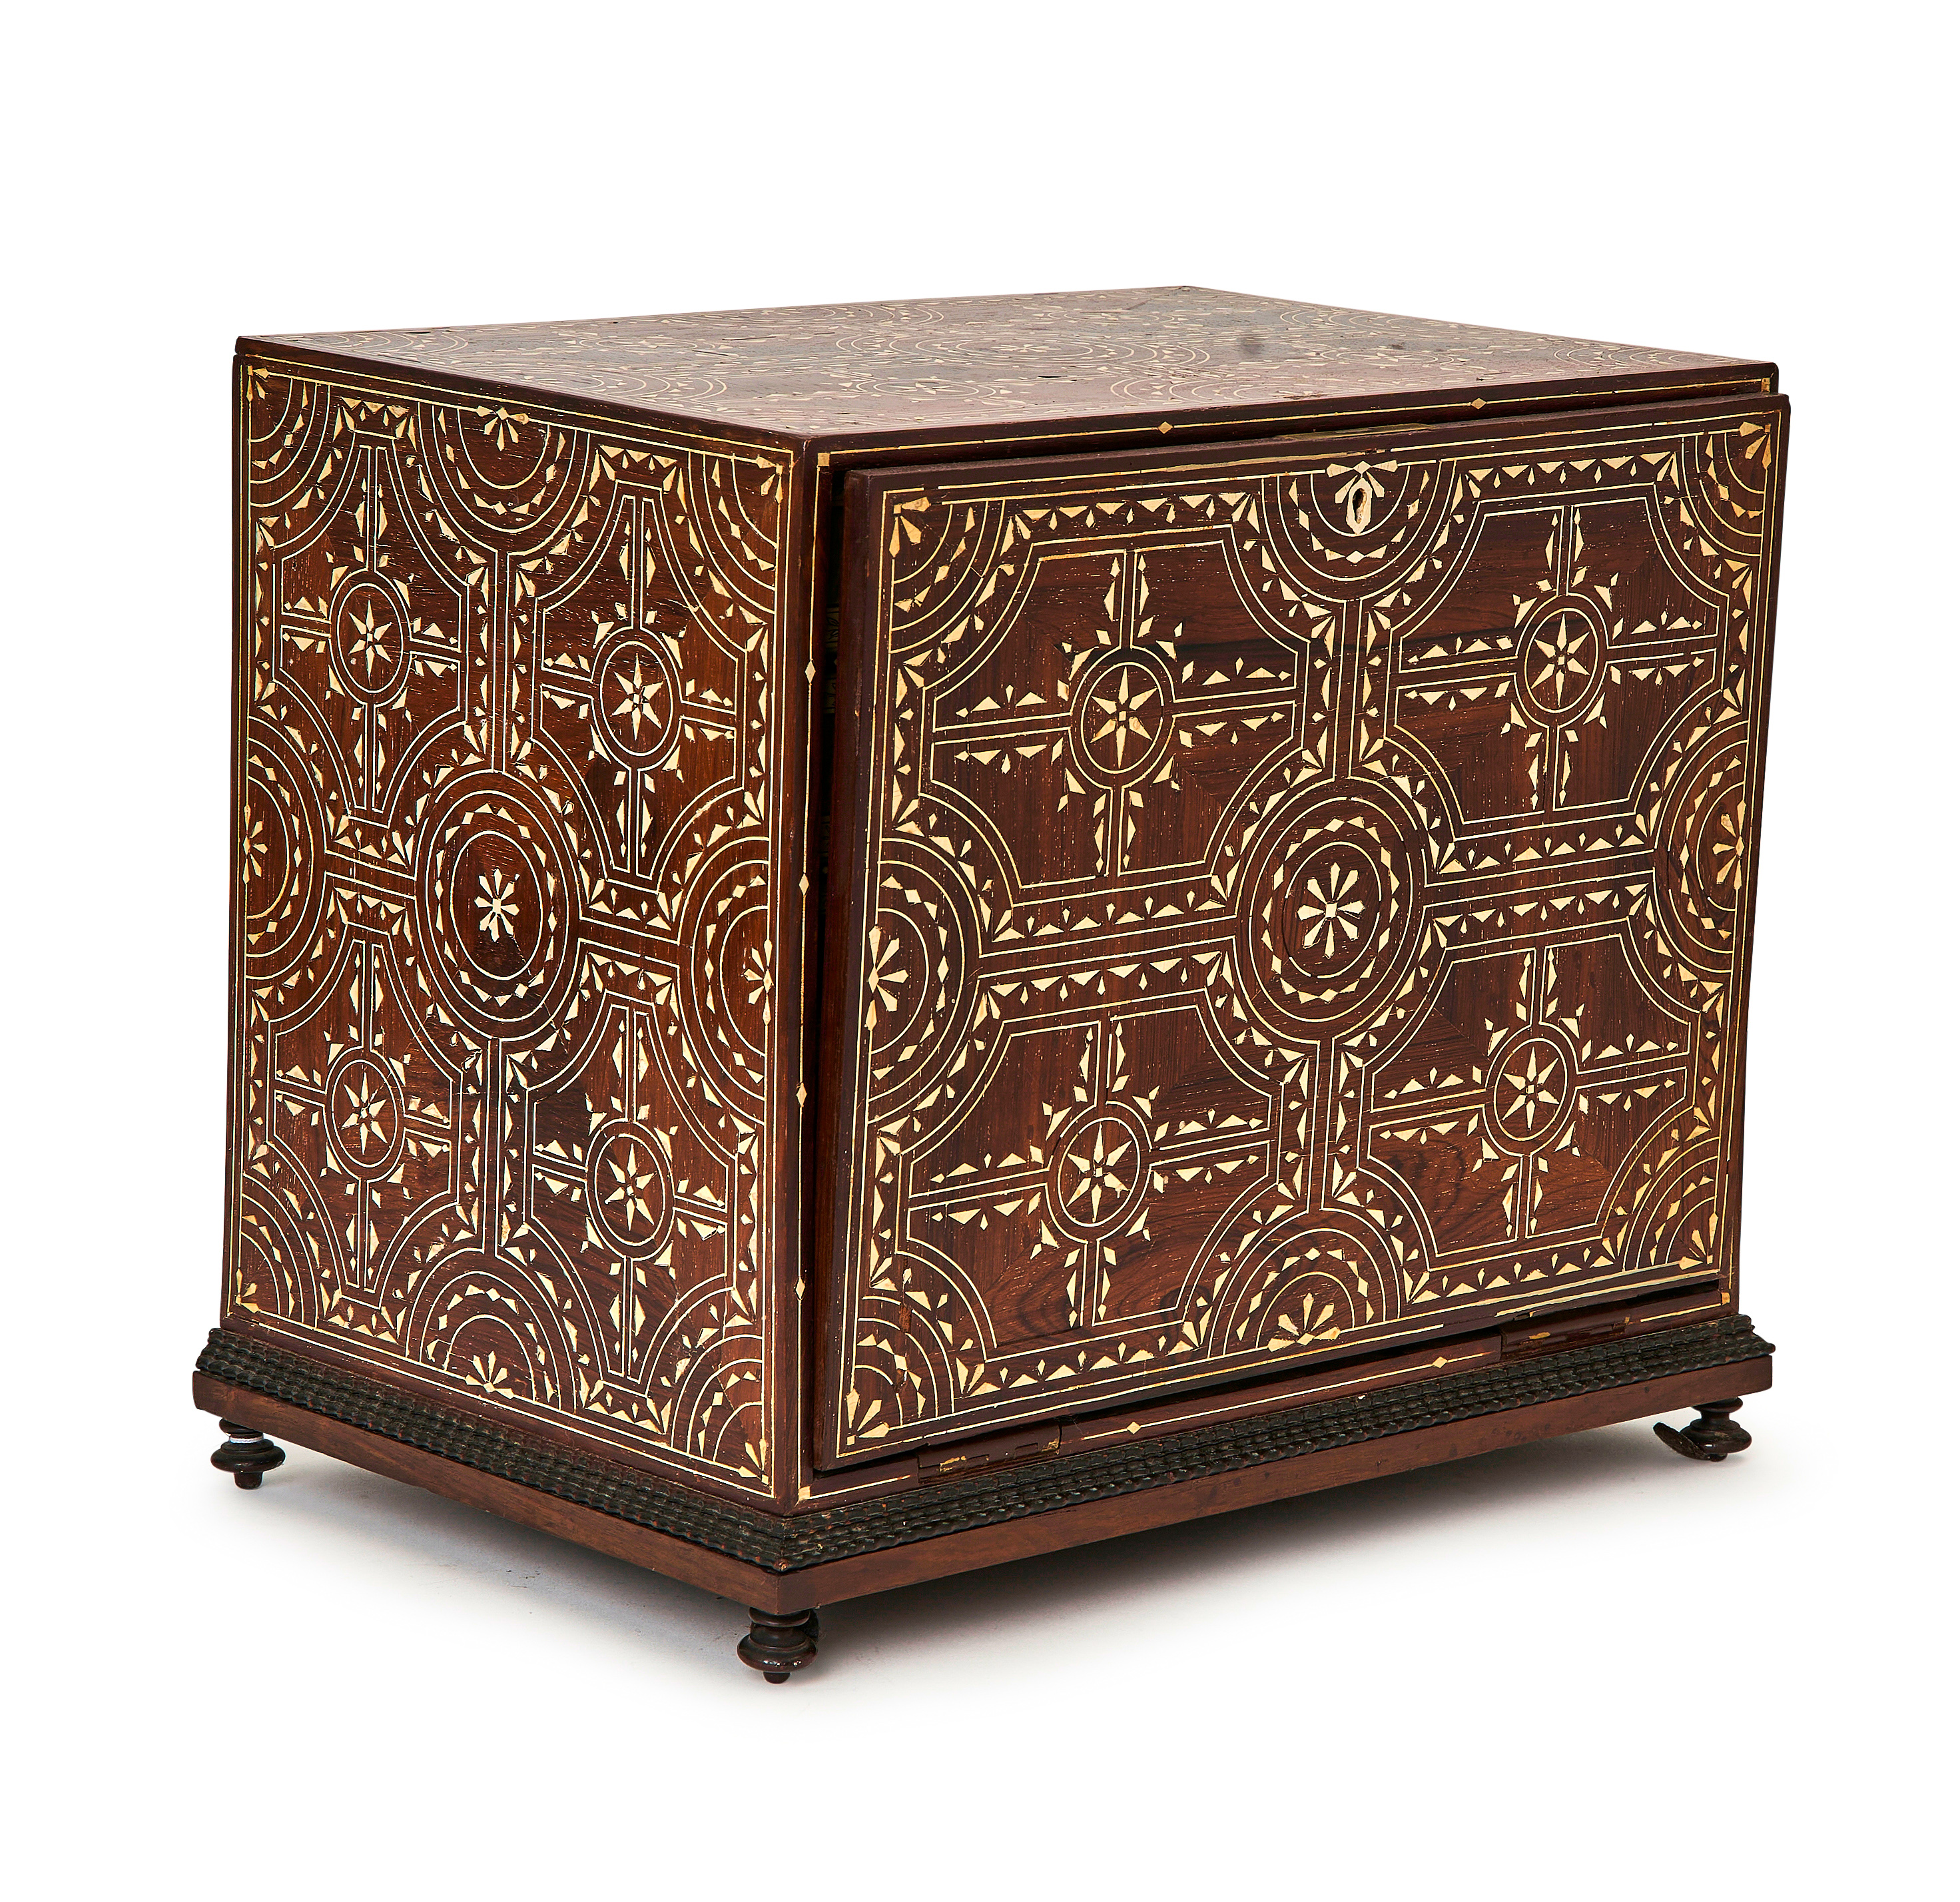 A GESSO & REISIN INLAID WRITING TABLE CABINET, 19TH CENTURY, ITALIAN OR GERMANY - Image 4 of 5